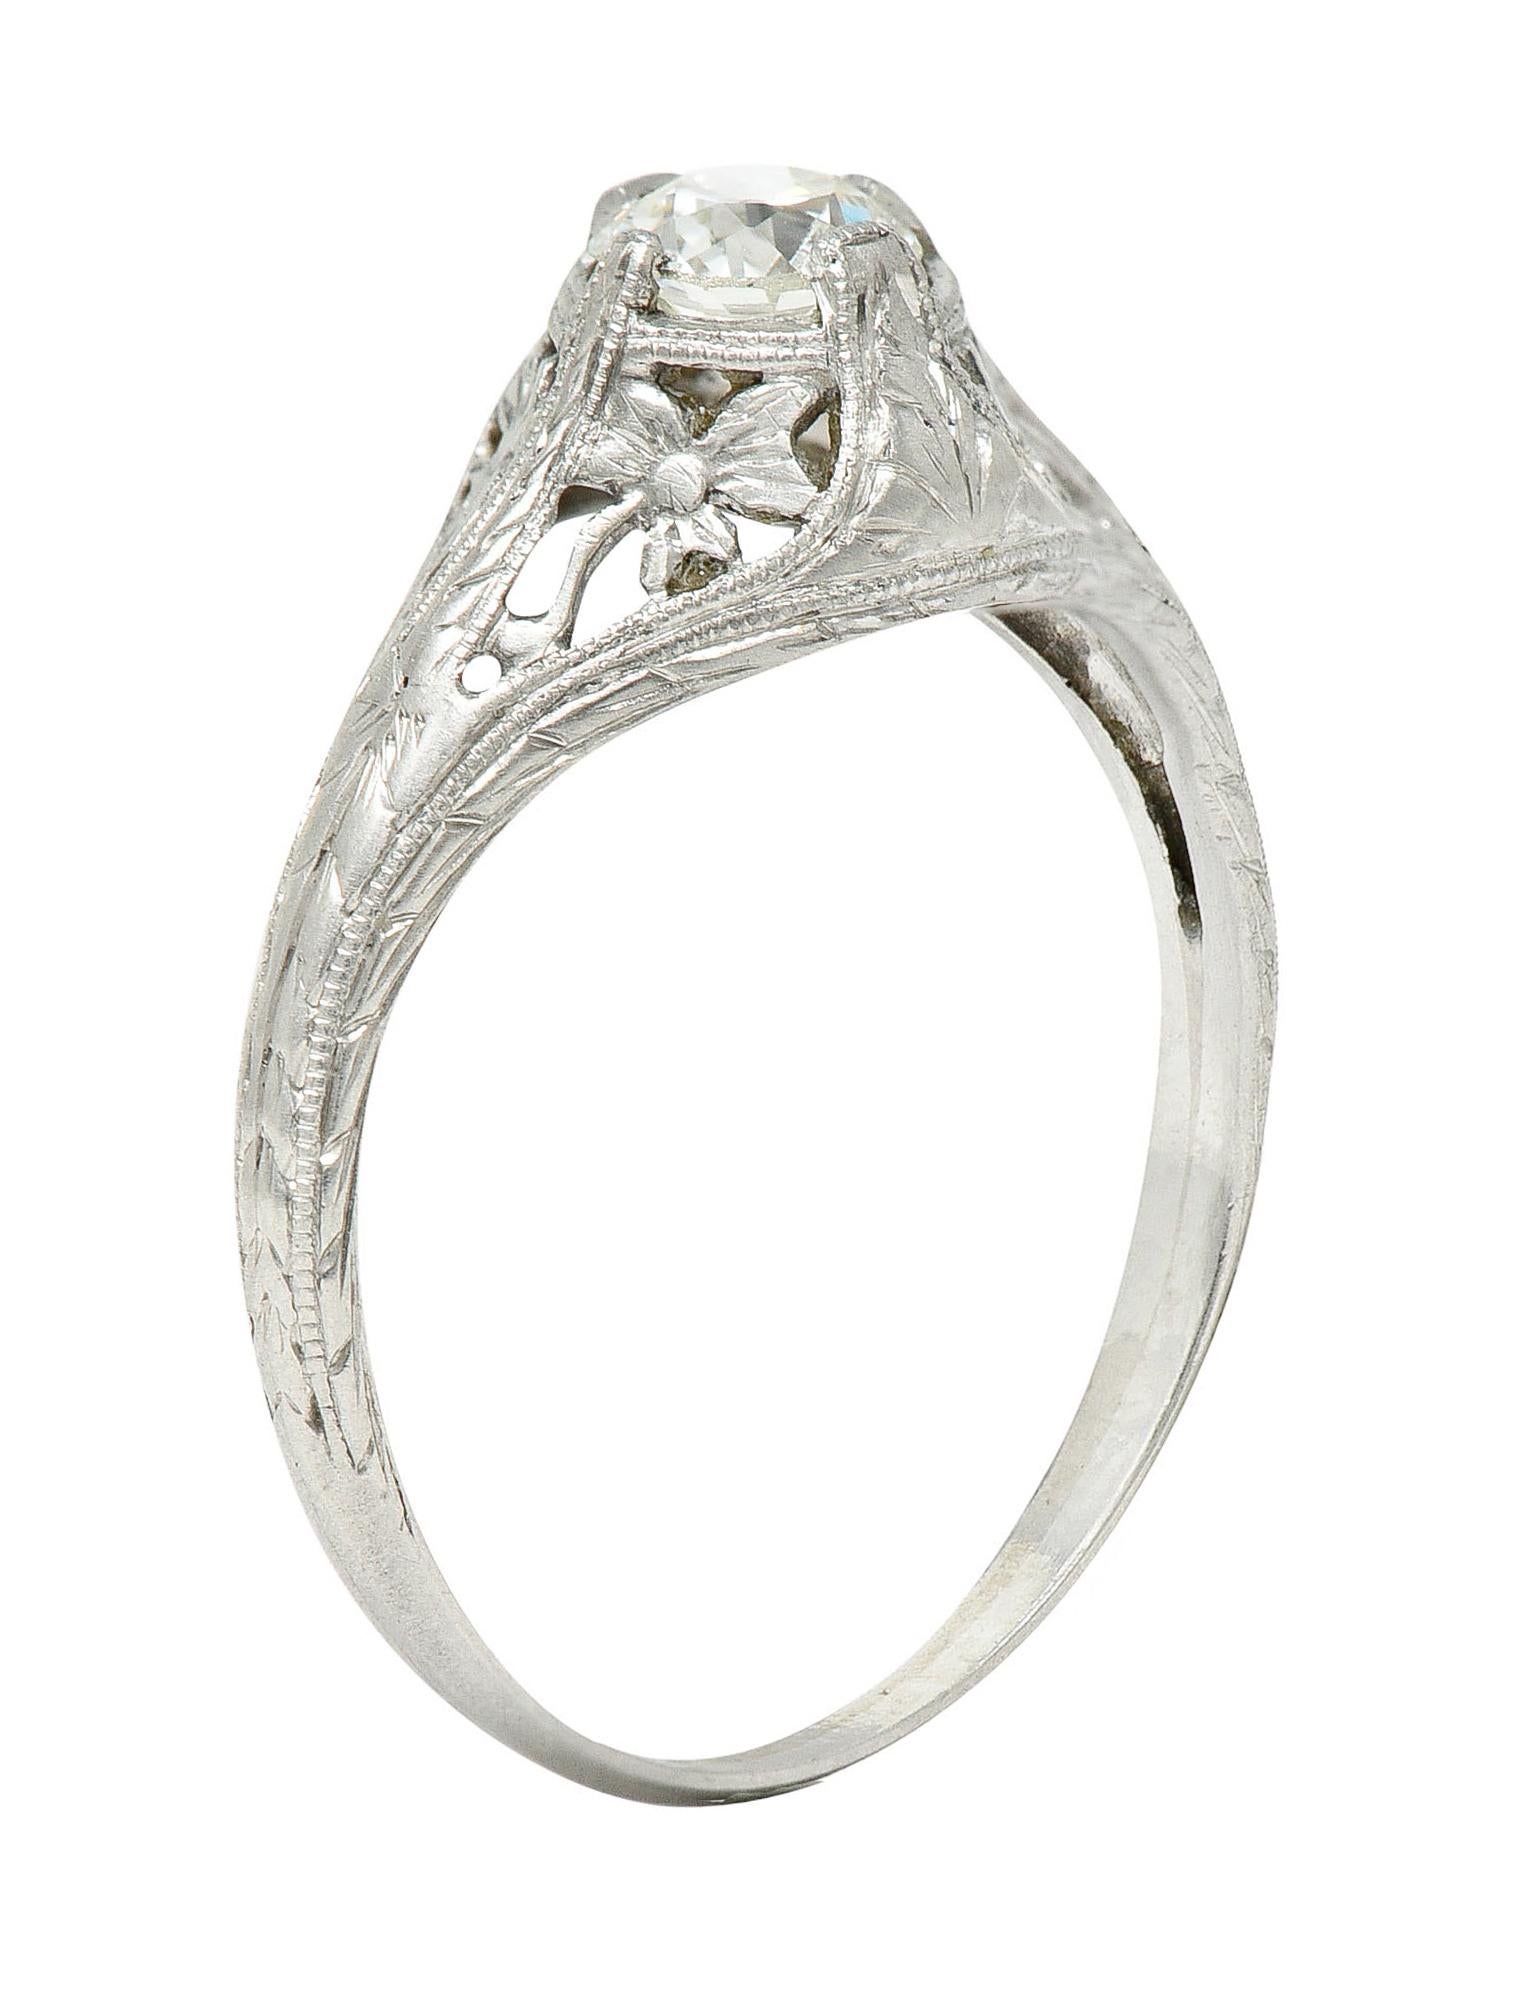 1920's Early Art Deco 0.43 Carat Diamond Platinum Clover Engagement Ring For Sale 1